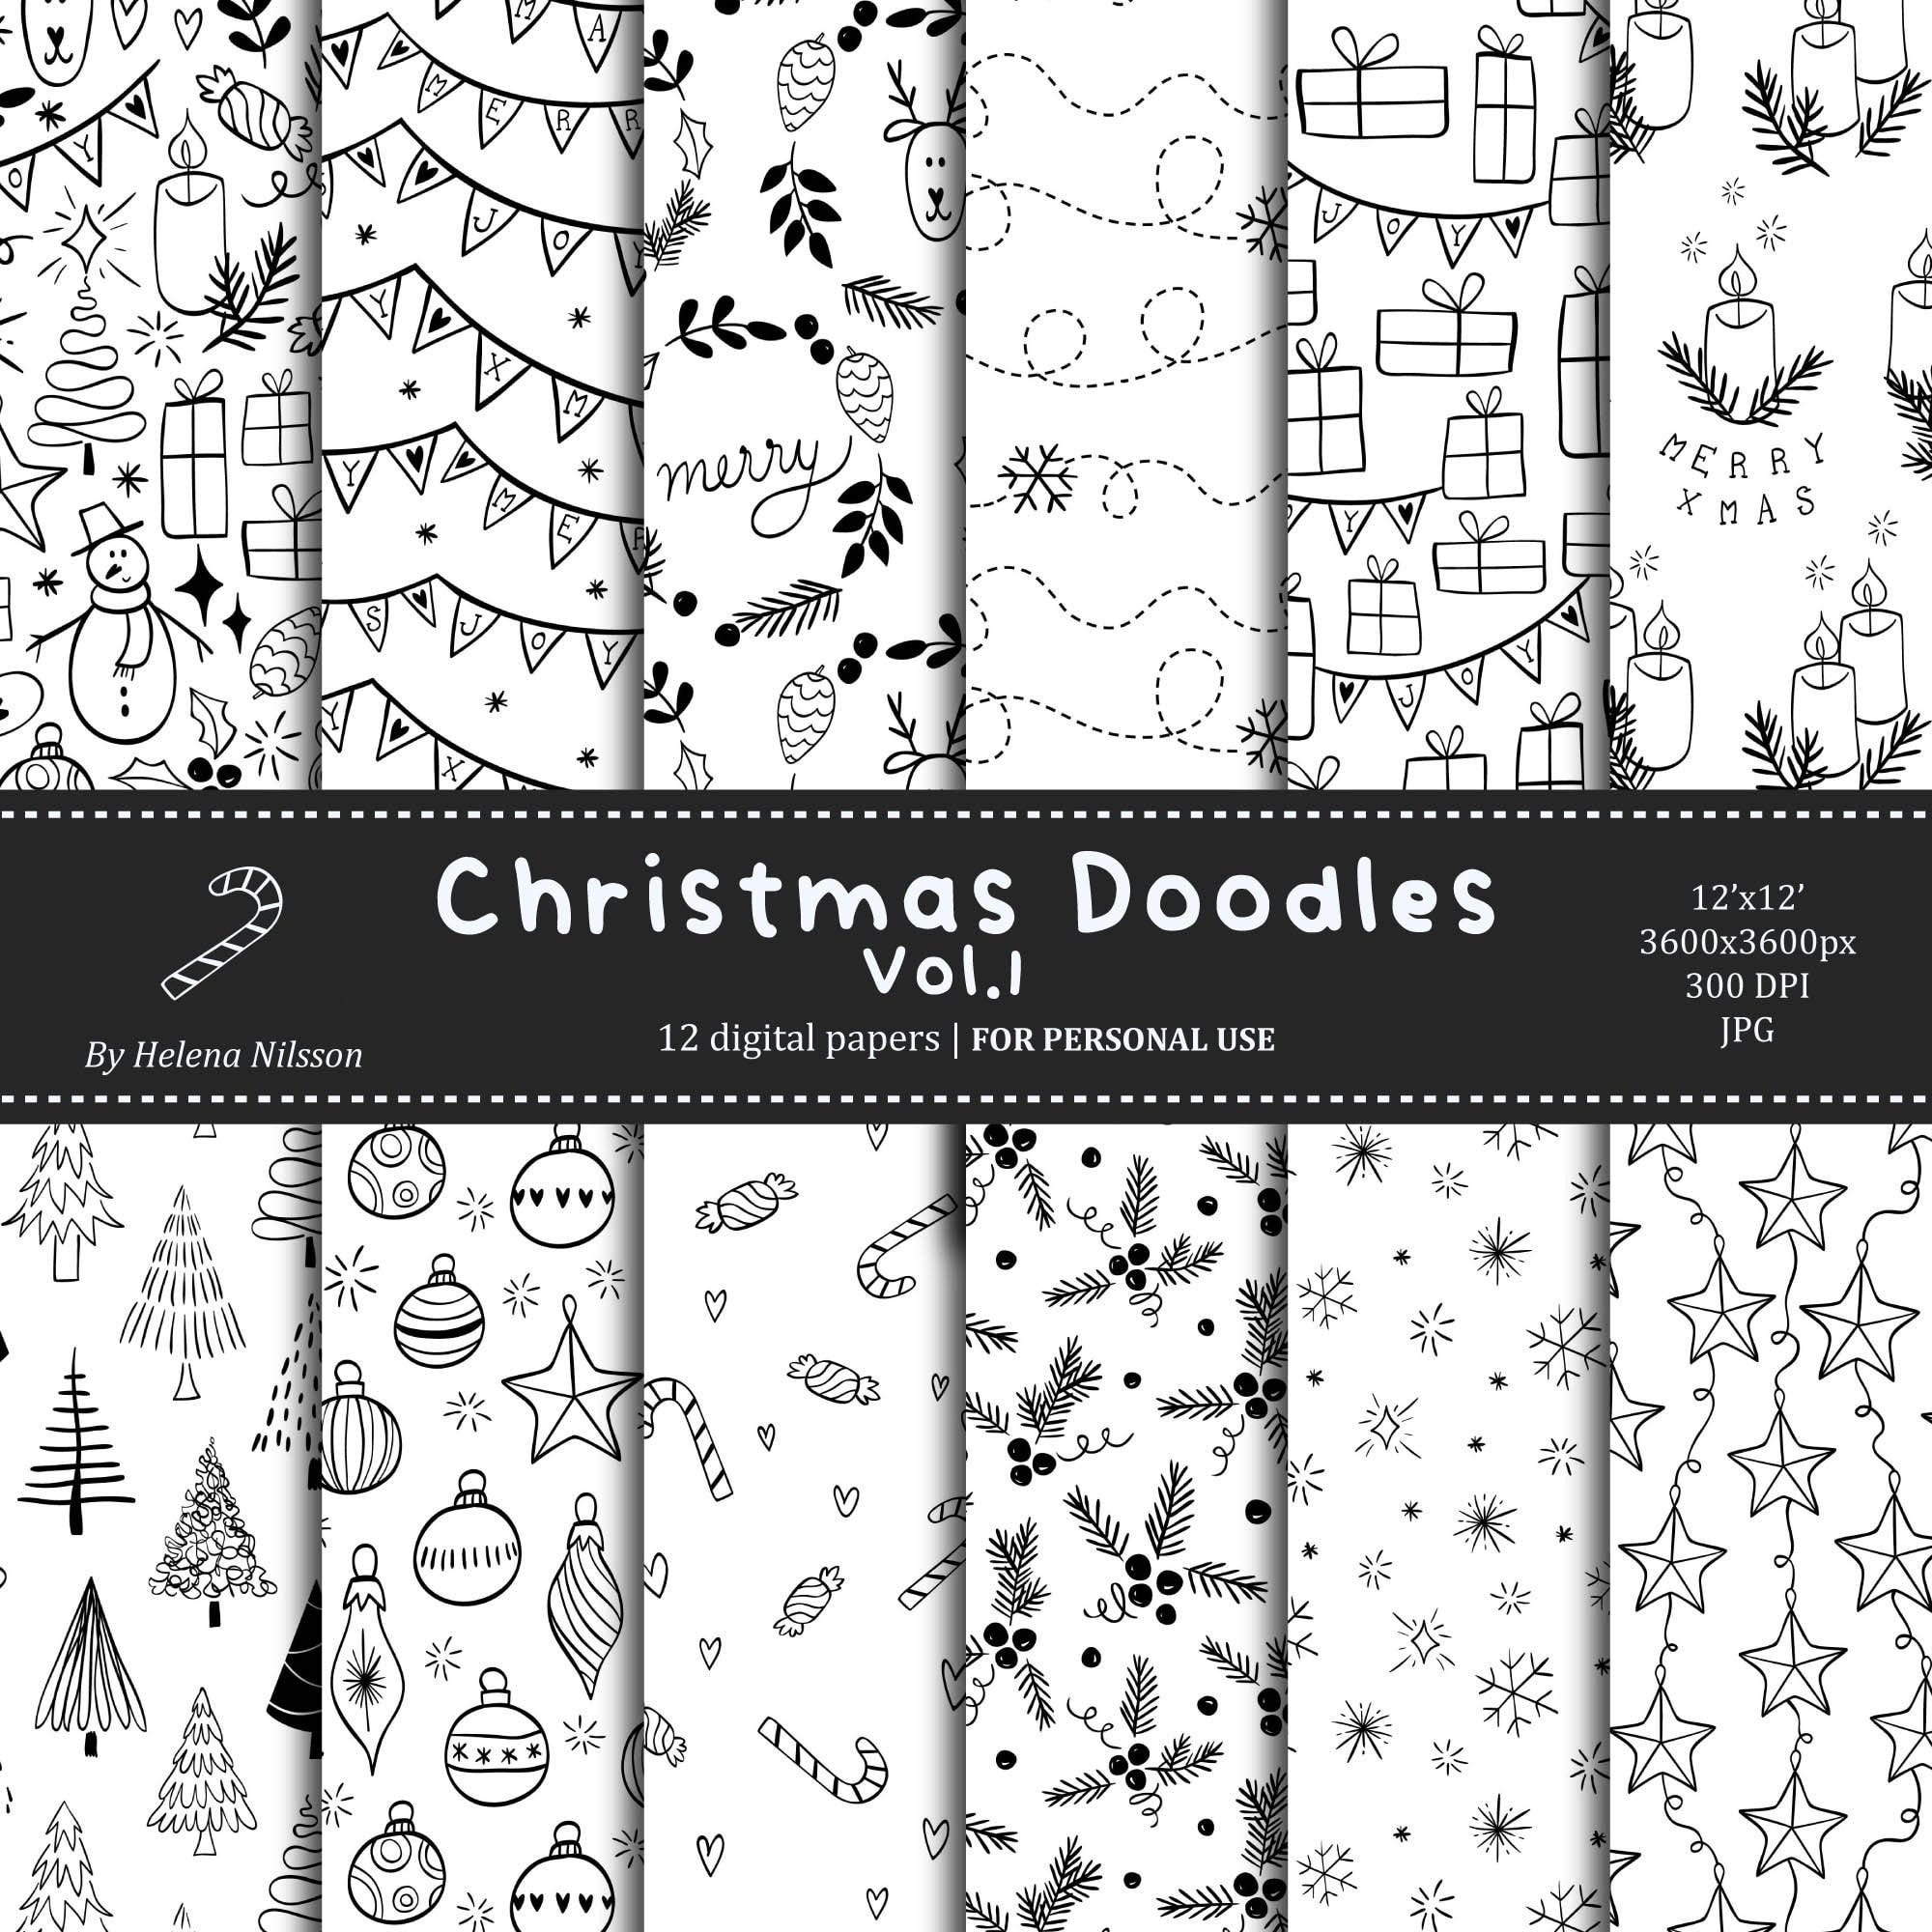 Christmas Doodles digital paper pack Vol.1 - 12 printable papers for personal use - black and white winter patterns